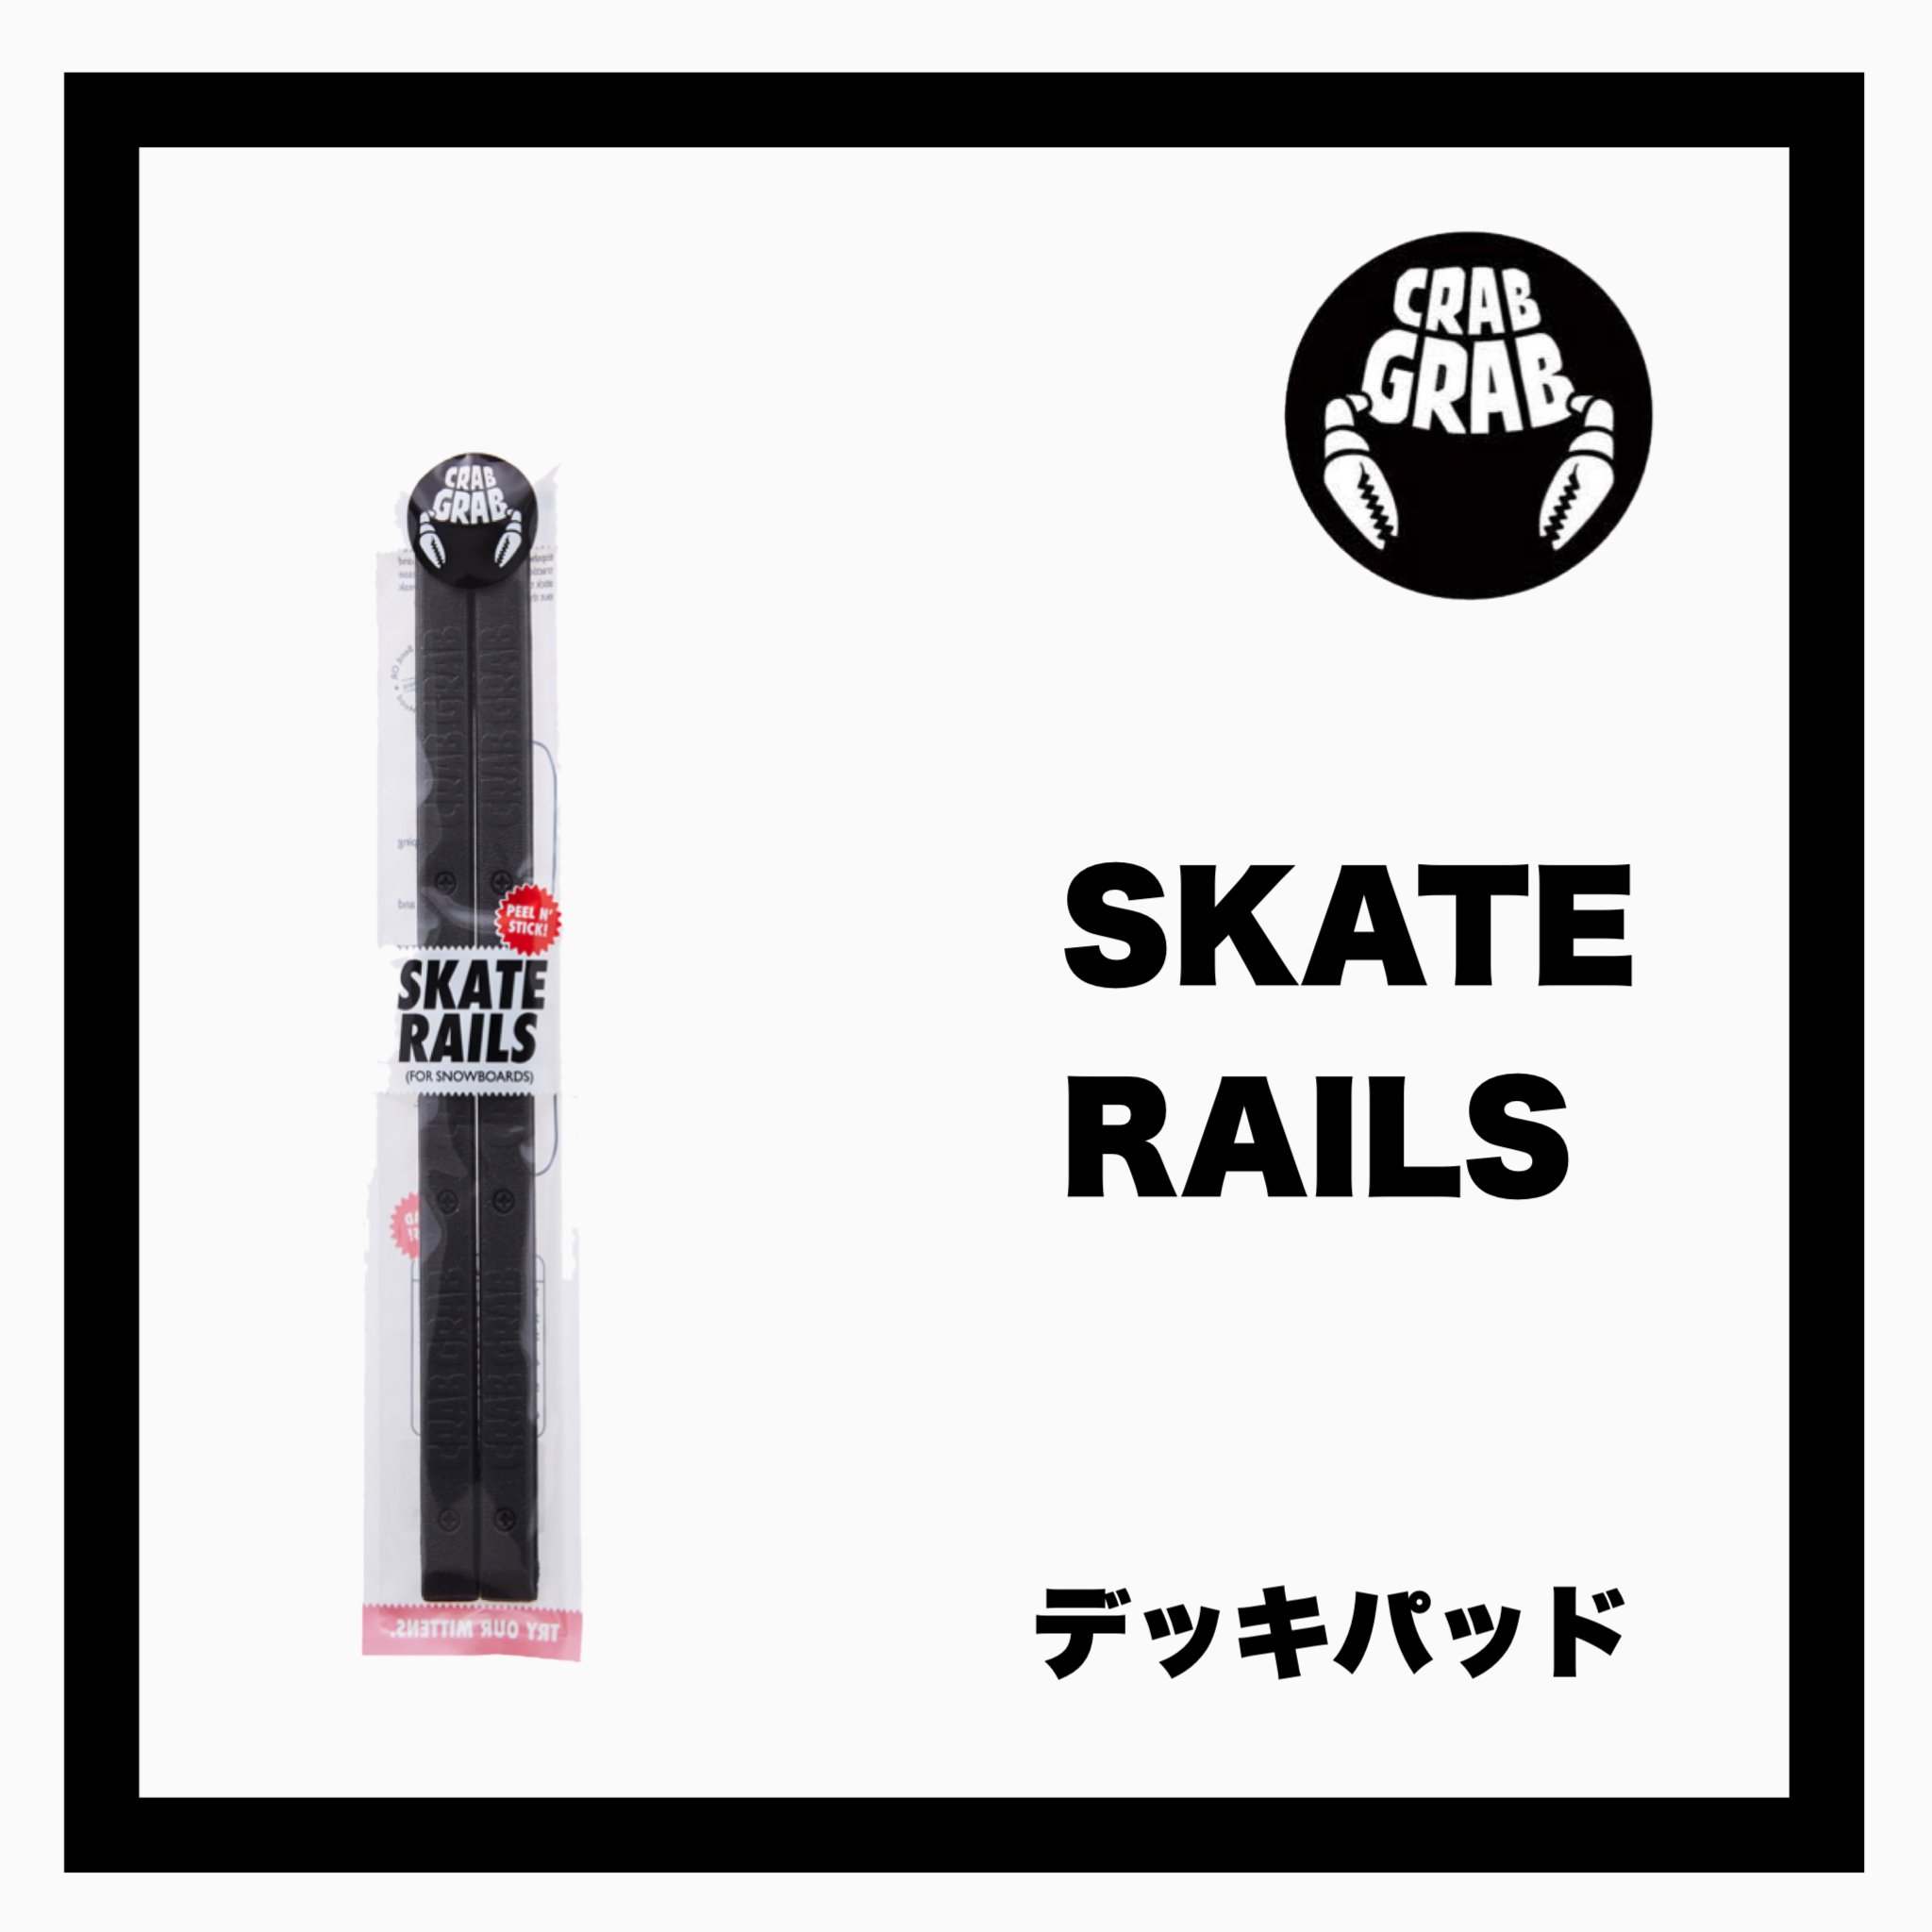 <img class='new_mark_img1' src='https://img.shop-pro.jp/img/new/icons14.gif' style='border:none;display:inline;margin:0px;padding:0px;width:auto;' />CRAB GRABSKATE RAILS